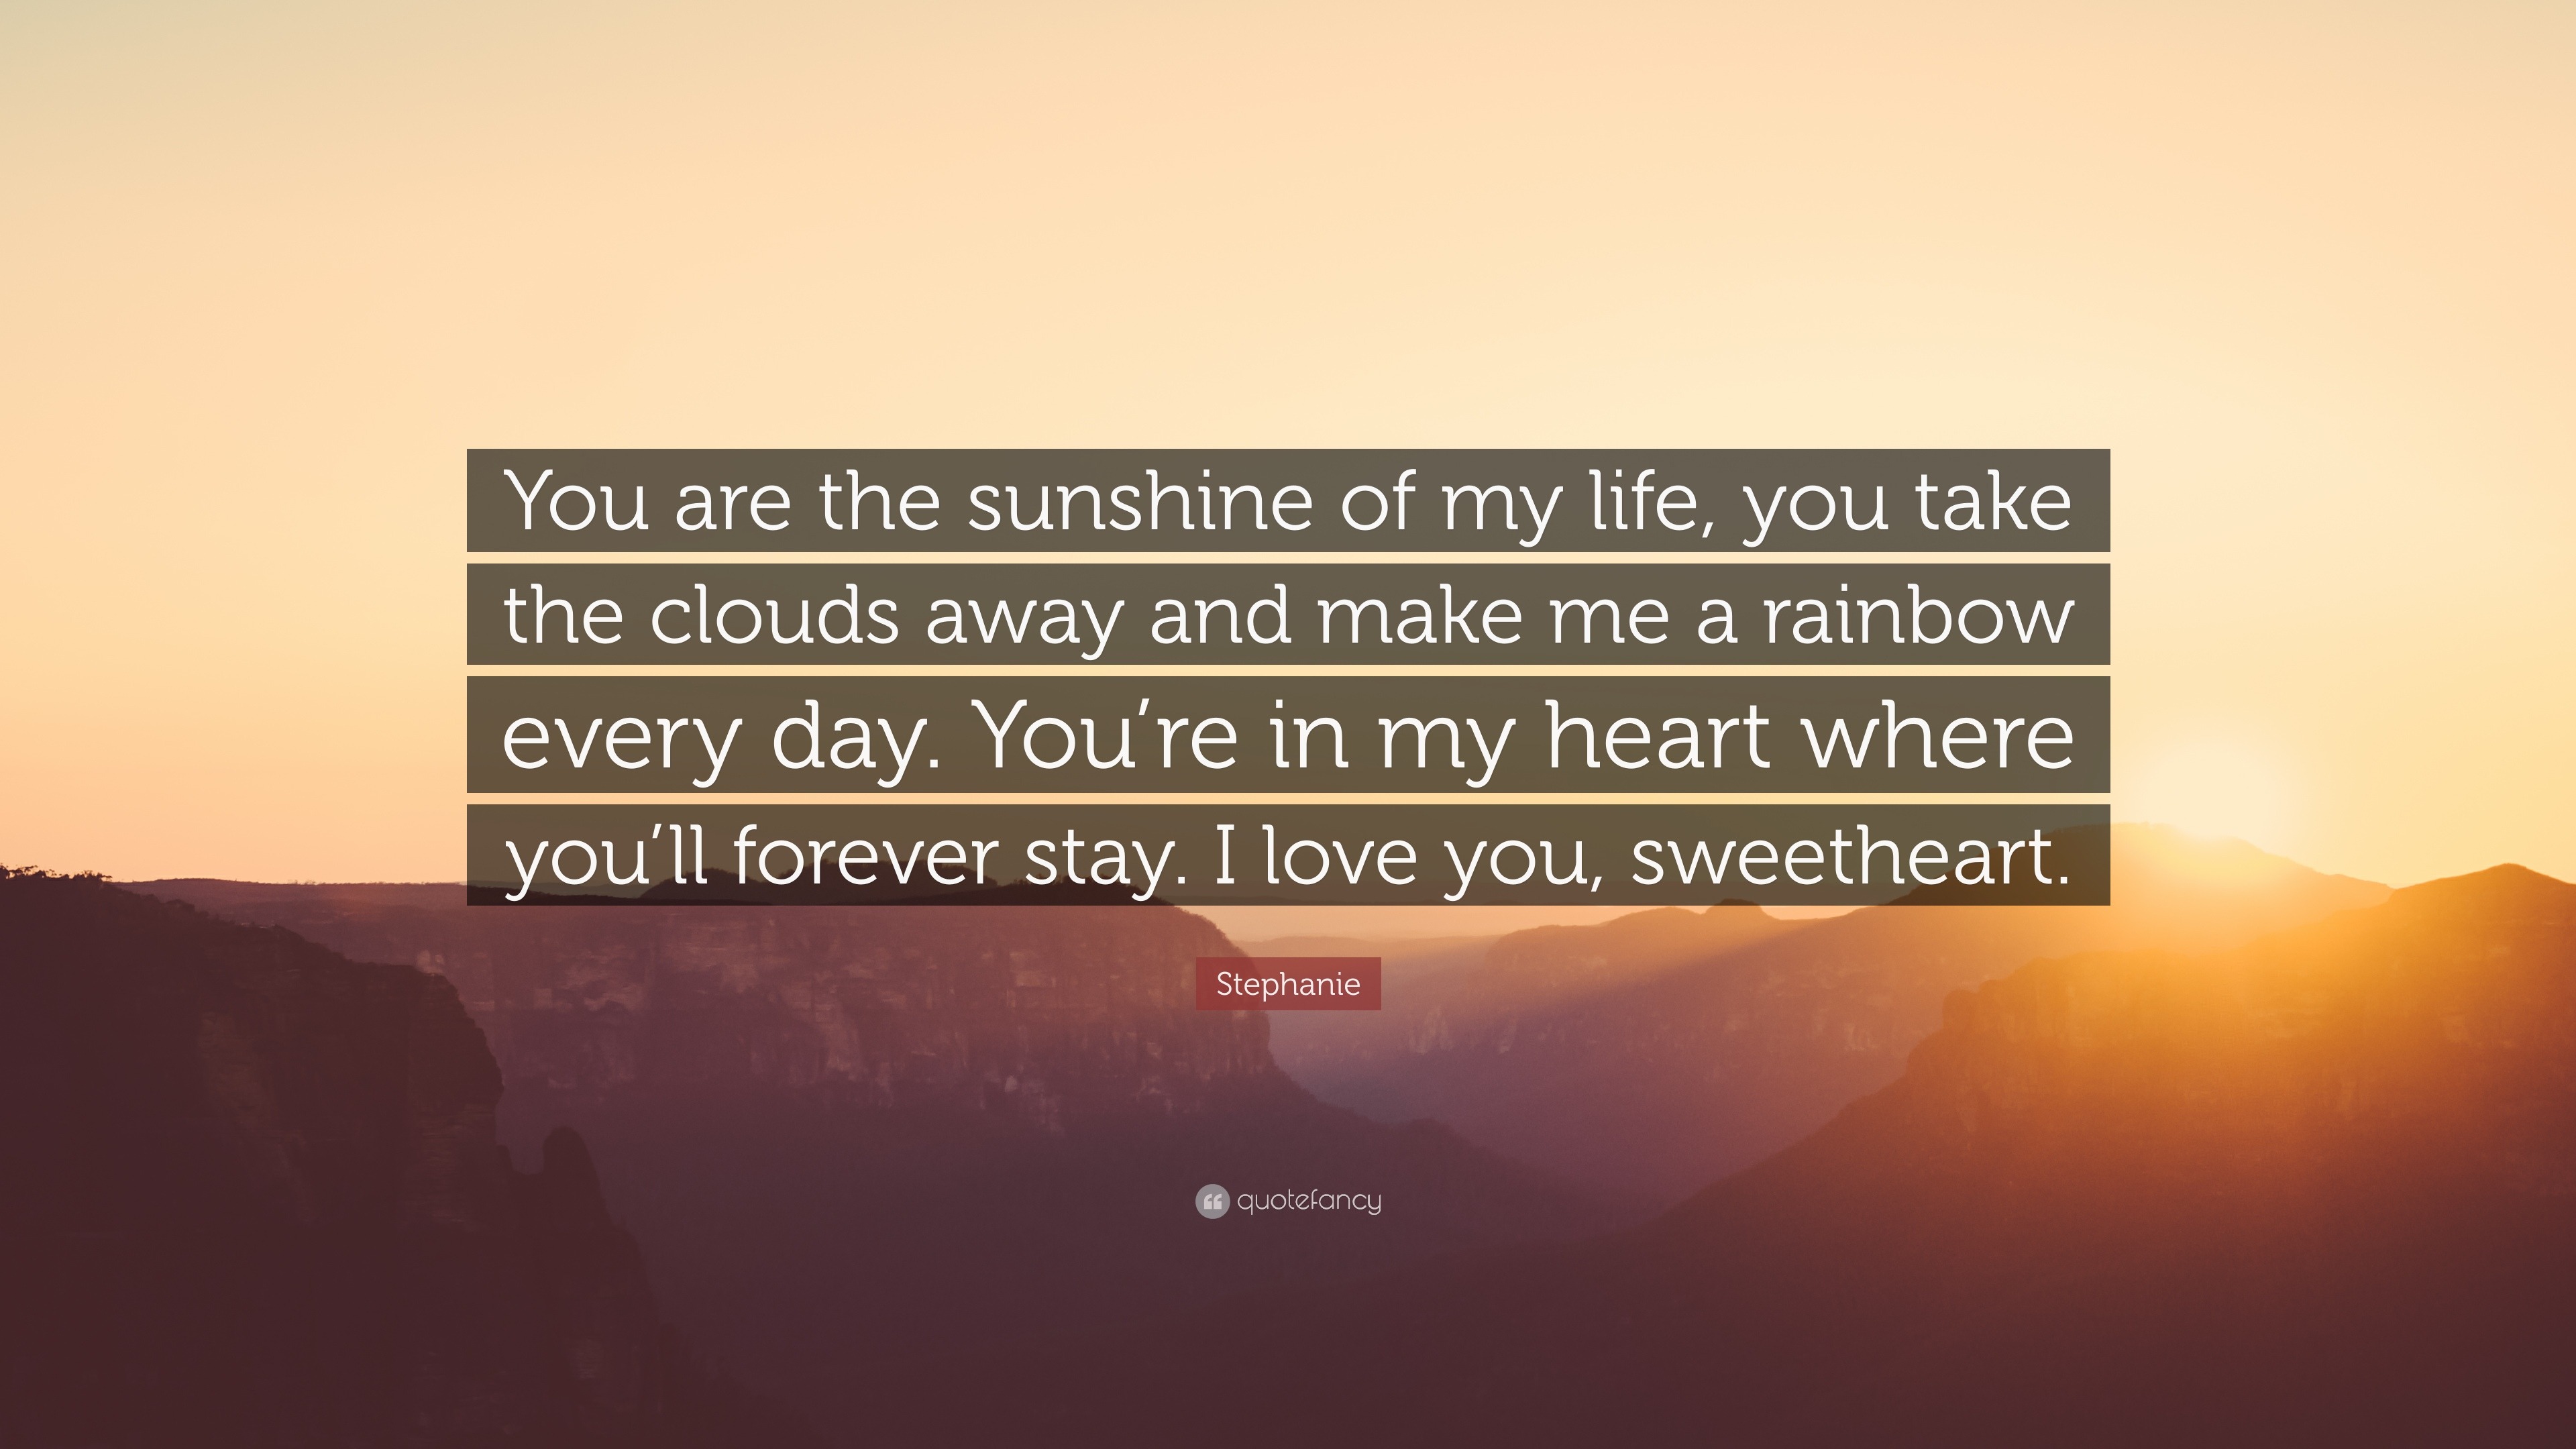 Stephanie Quote You Are The Sunshine Of My Life You Take The Clouds Away And Make Me A Rainbow Every Day You Re In My Heart Where You